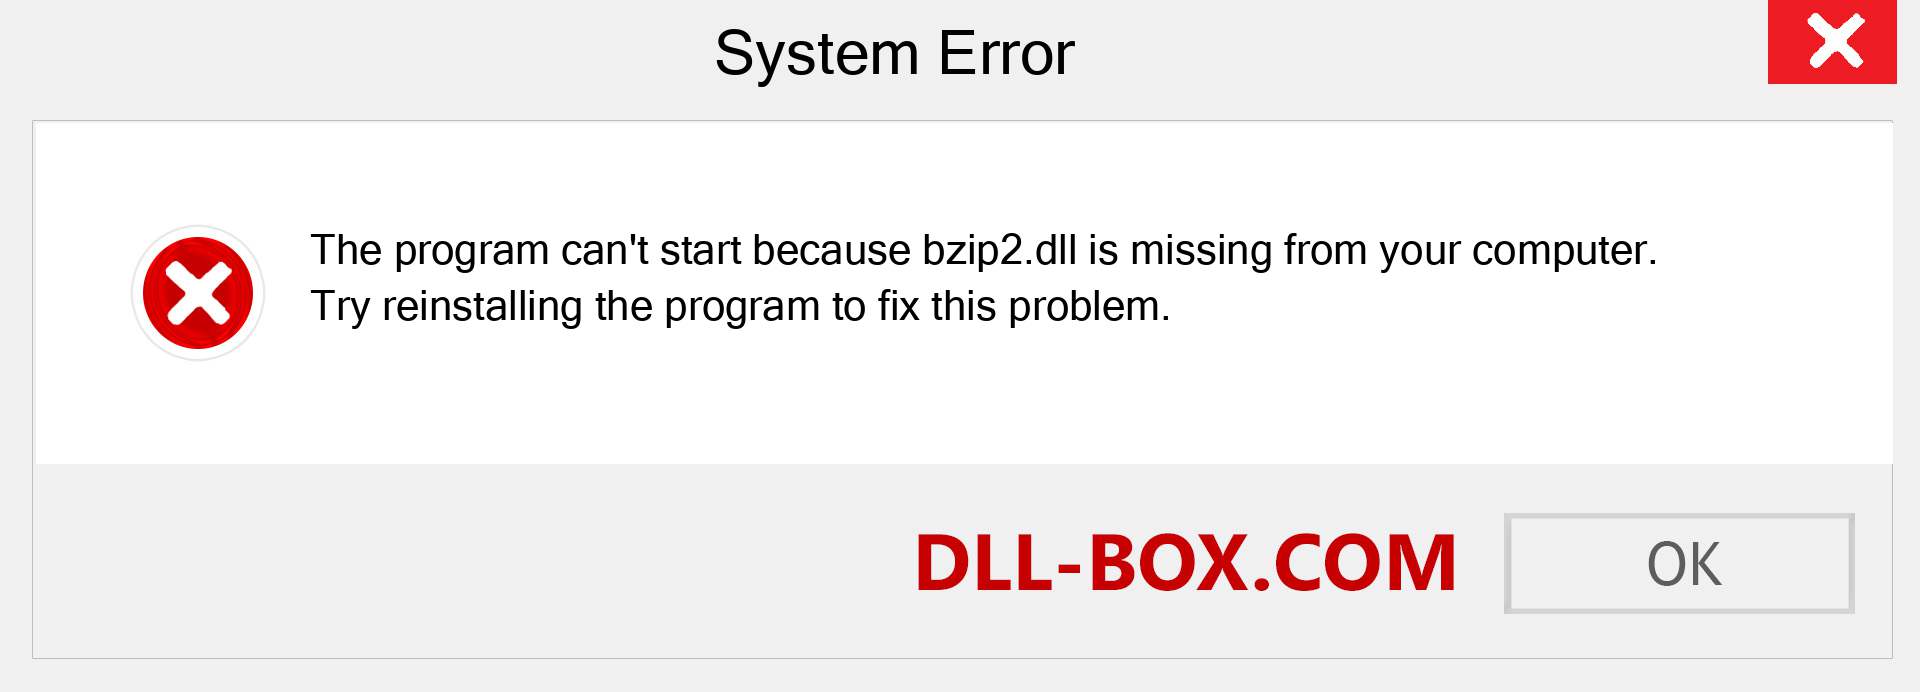  bzip2.dll file is missing?. Download for Windows 7, 8, 10 - Fix  bzip2 dll Missing Error on Windows, photos, images